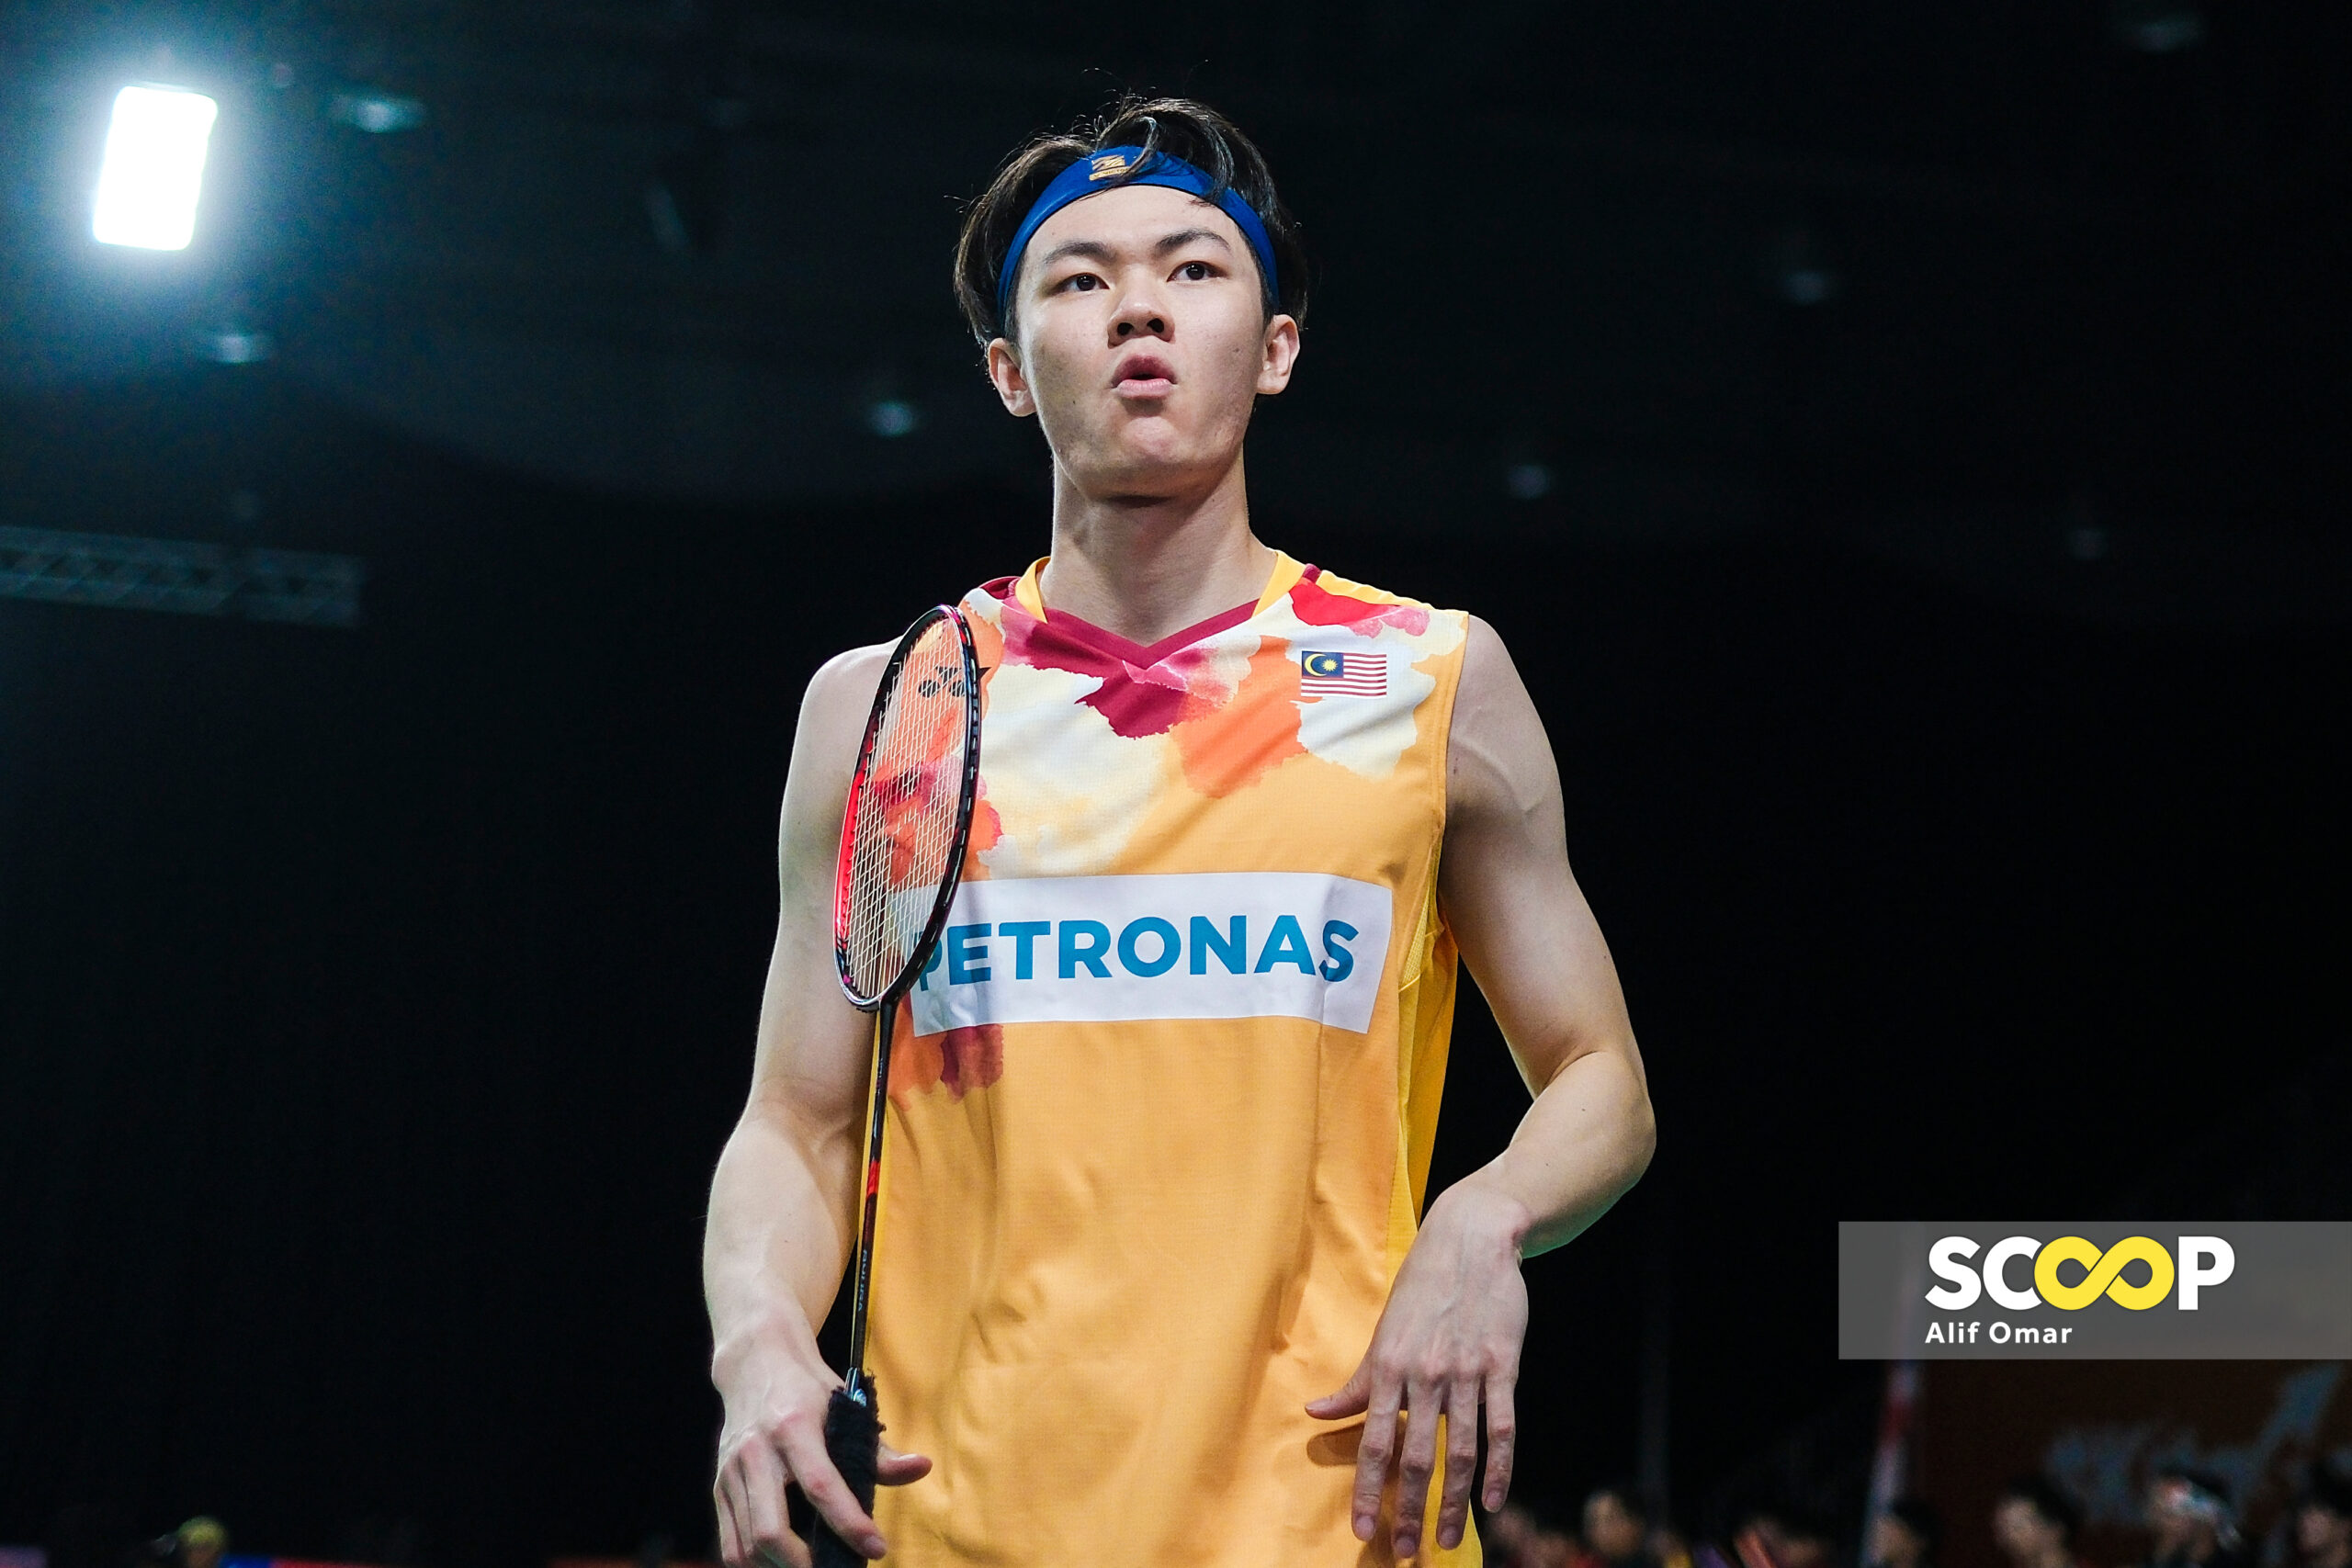 Zii Jia skips group training, trains solo for Thomas Cup